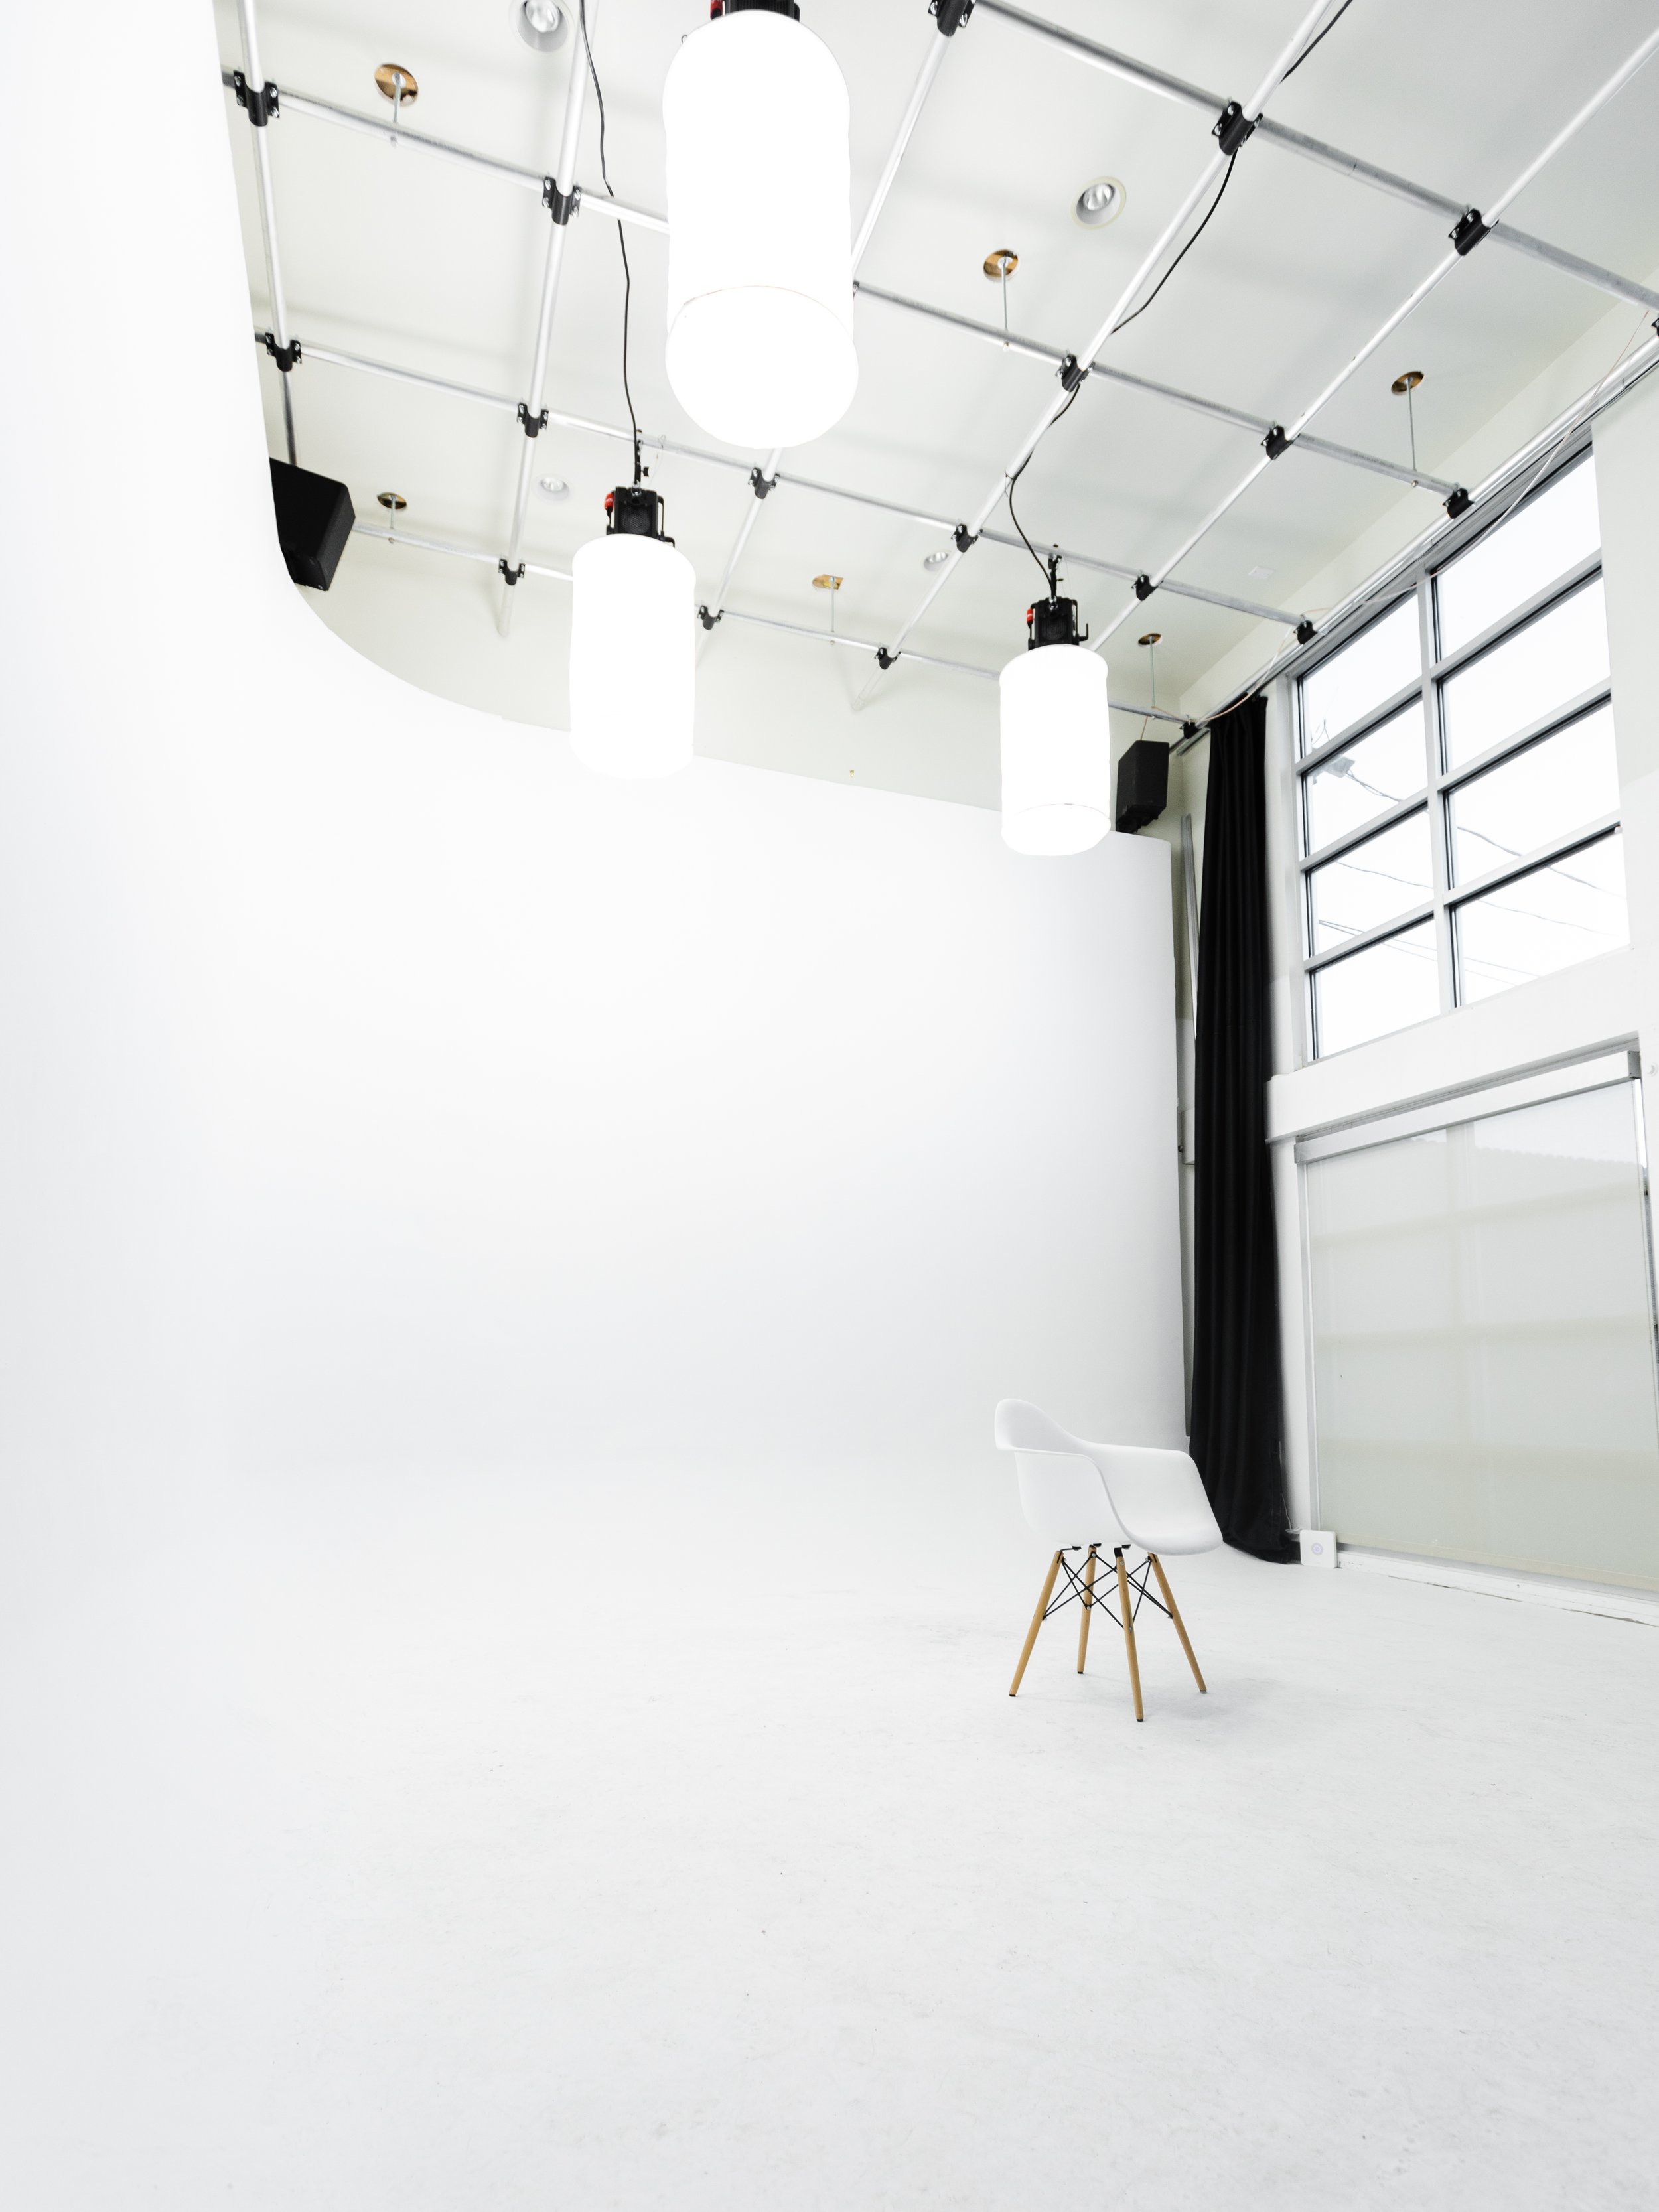 Chair on the White Cyc with 13x13 Grid Overhead